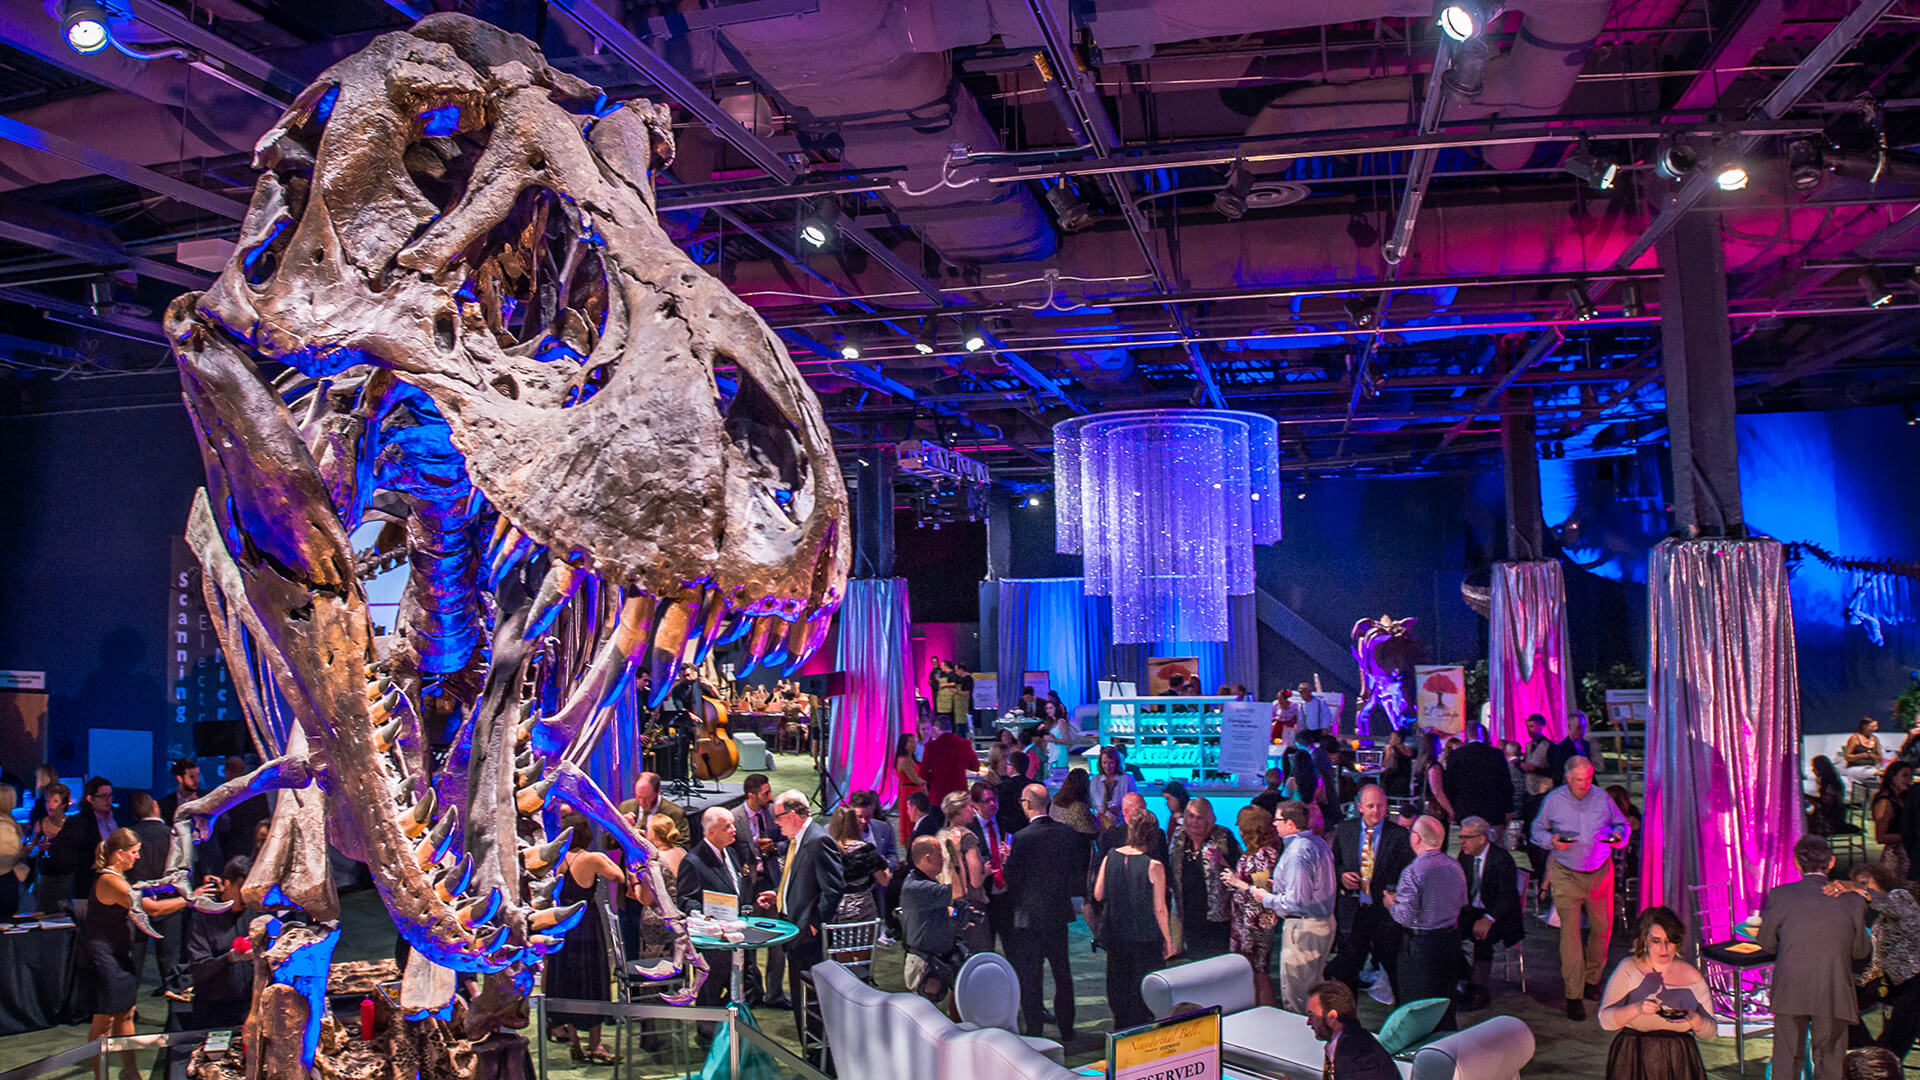 Large upscale event featured in DinoDigs exhibit hall.